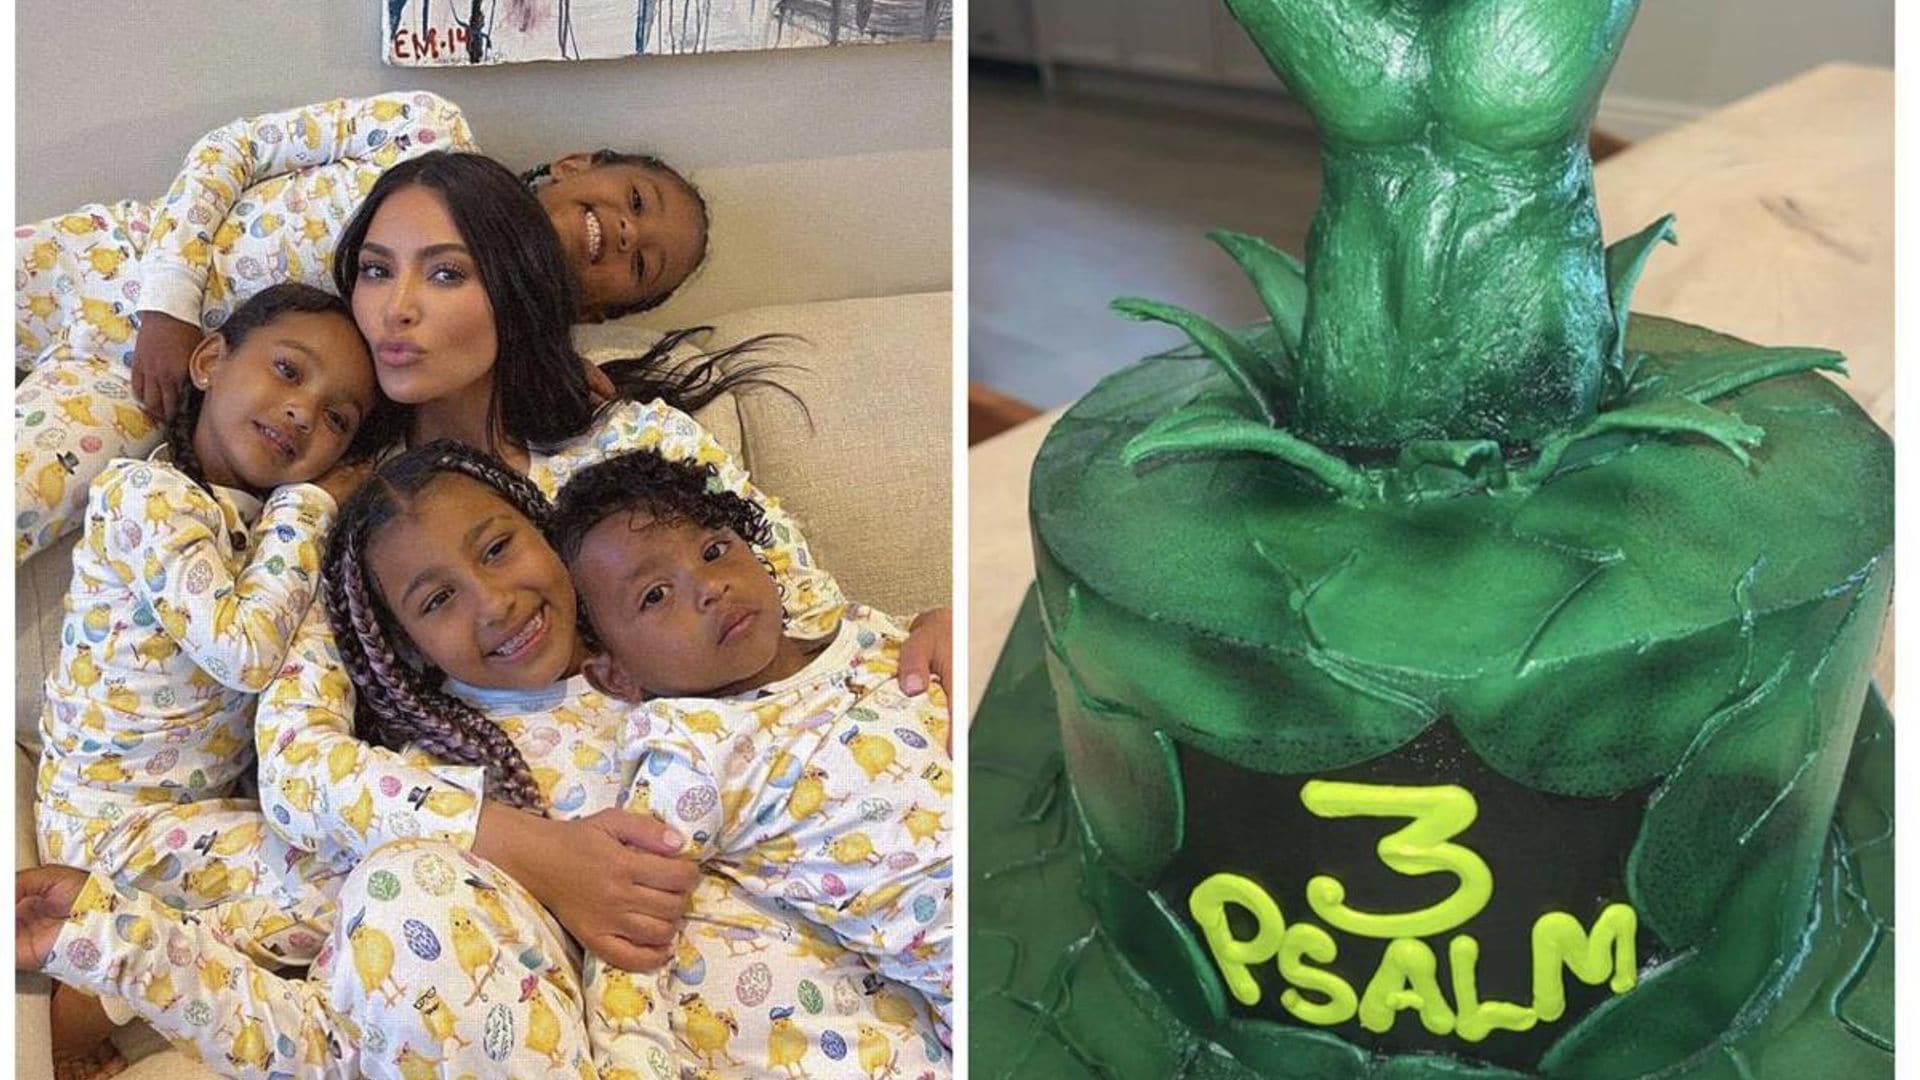 Kim Kardashian lets fans in on son Psalm’s extravagant 3rd birthday party